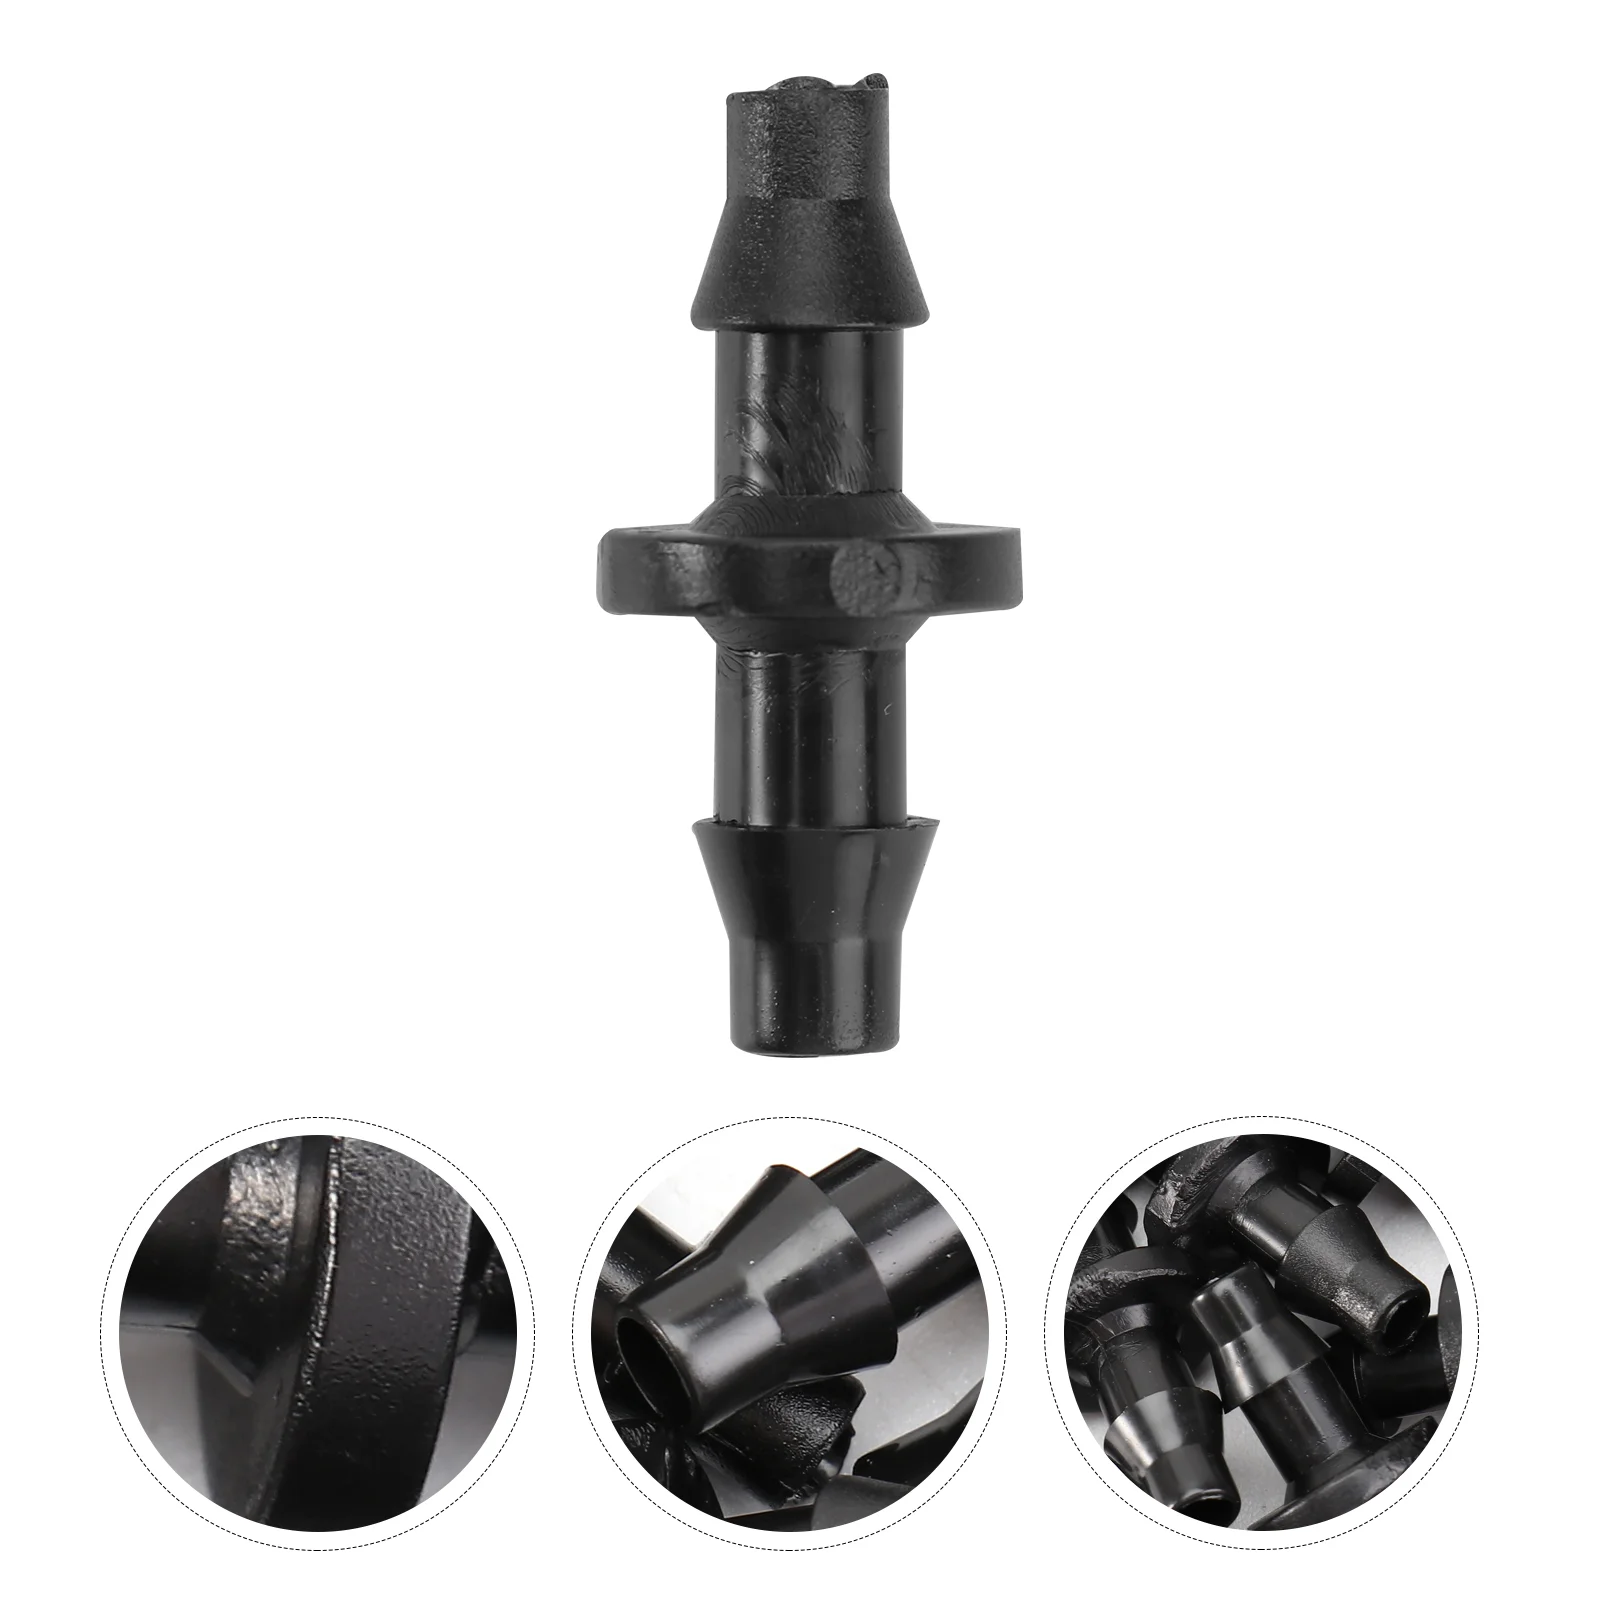 

Connectors Irrigation Tubing Barbed Fitting Drip Connector Sprinkler Line Coupling Garden Fittings Kit